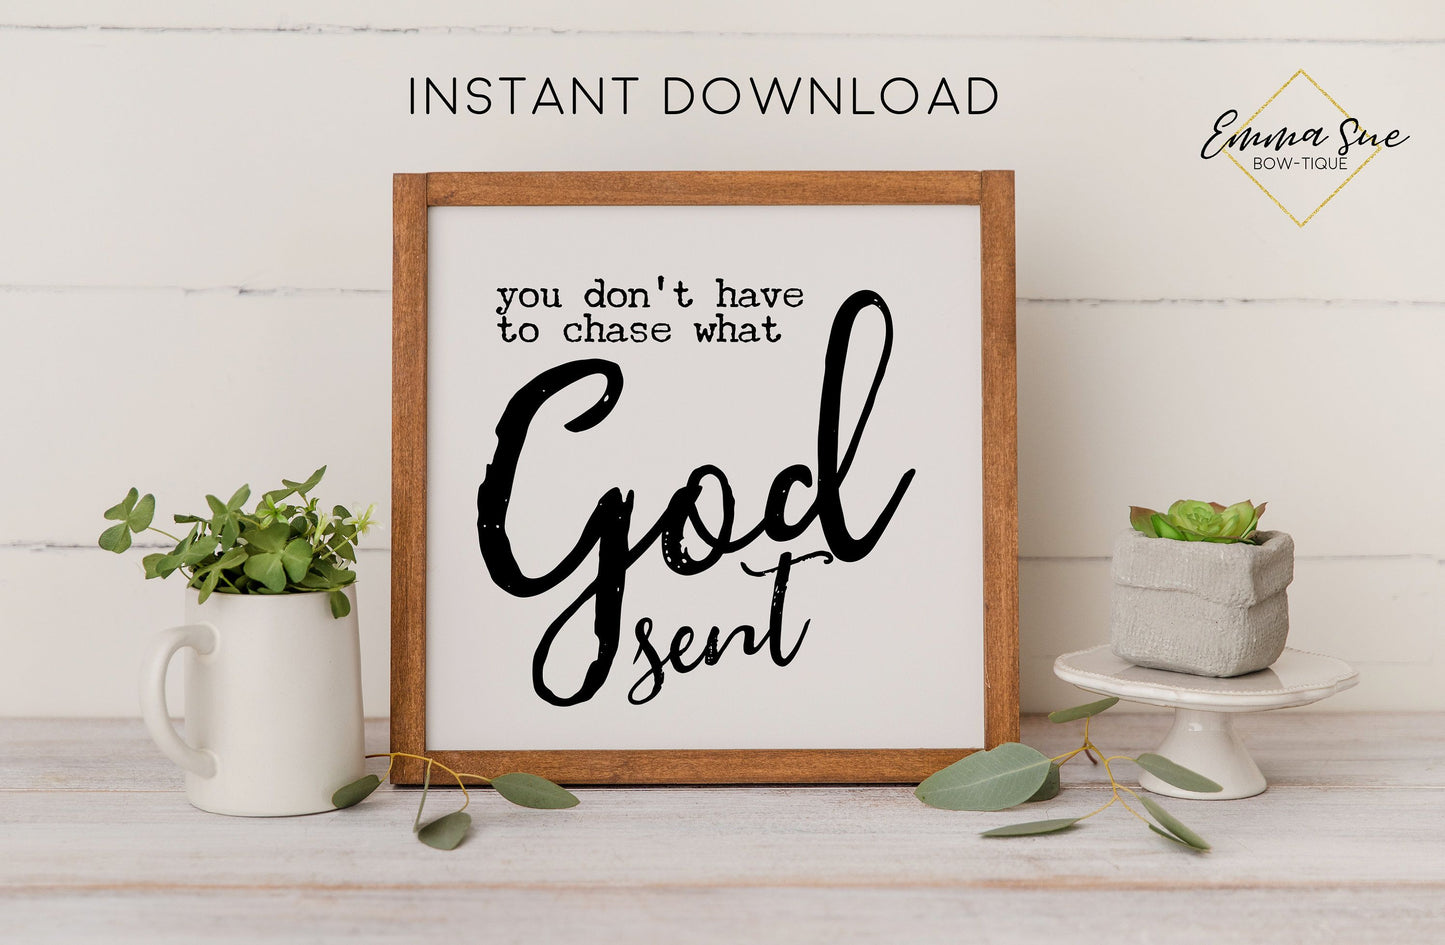 You don't have to chase what God sent - Christian Love Quotes Printable Art Sign Digital File